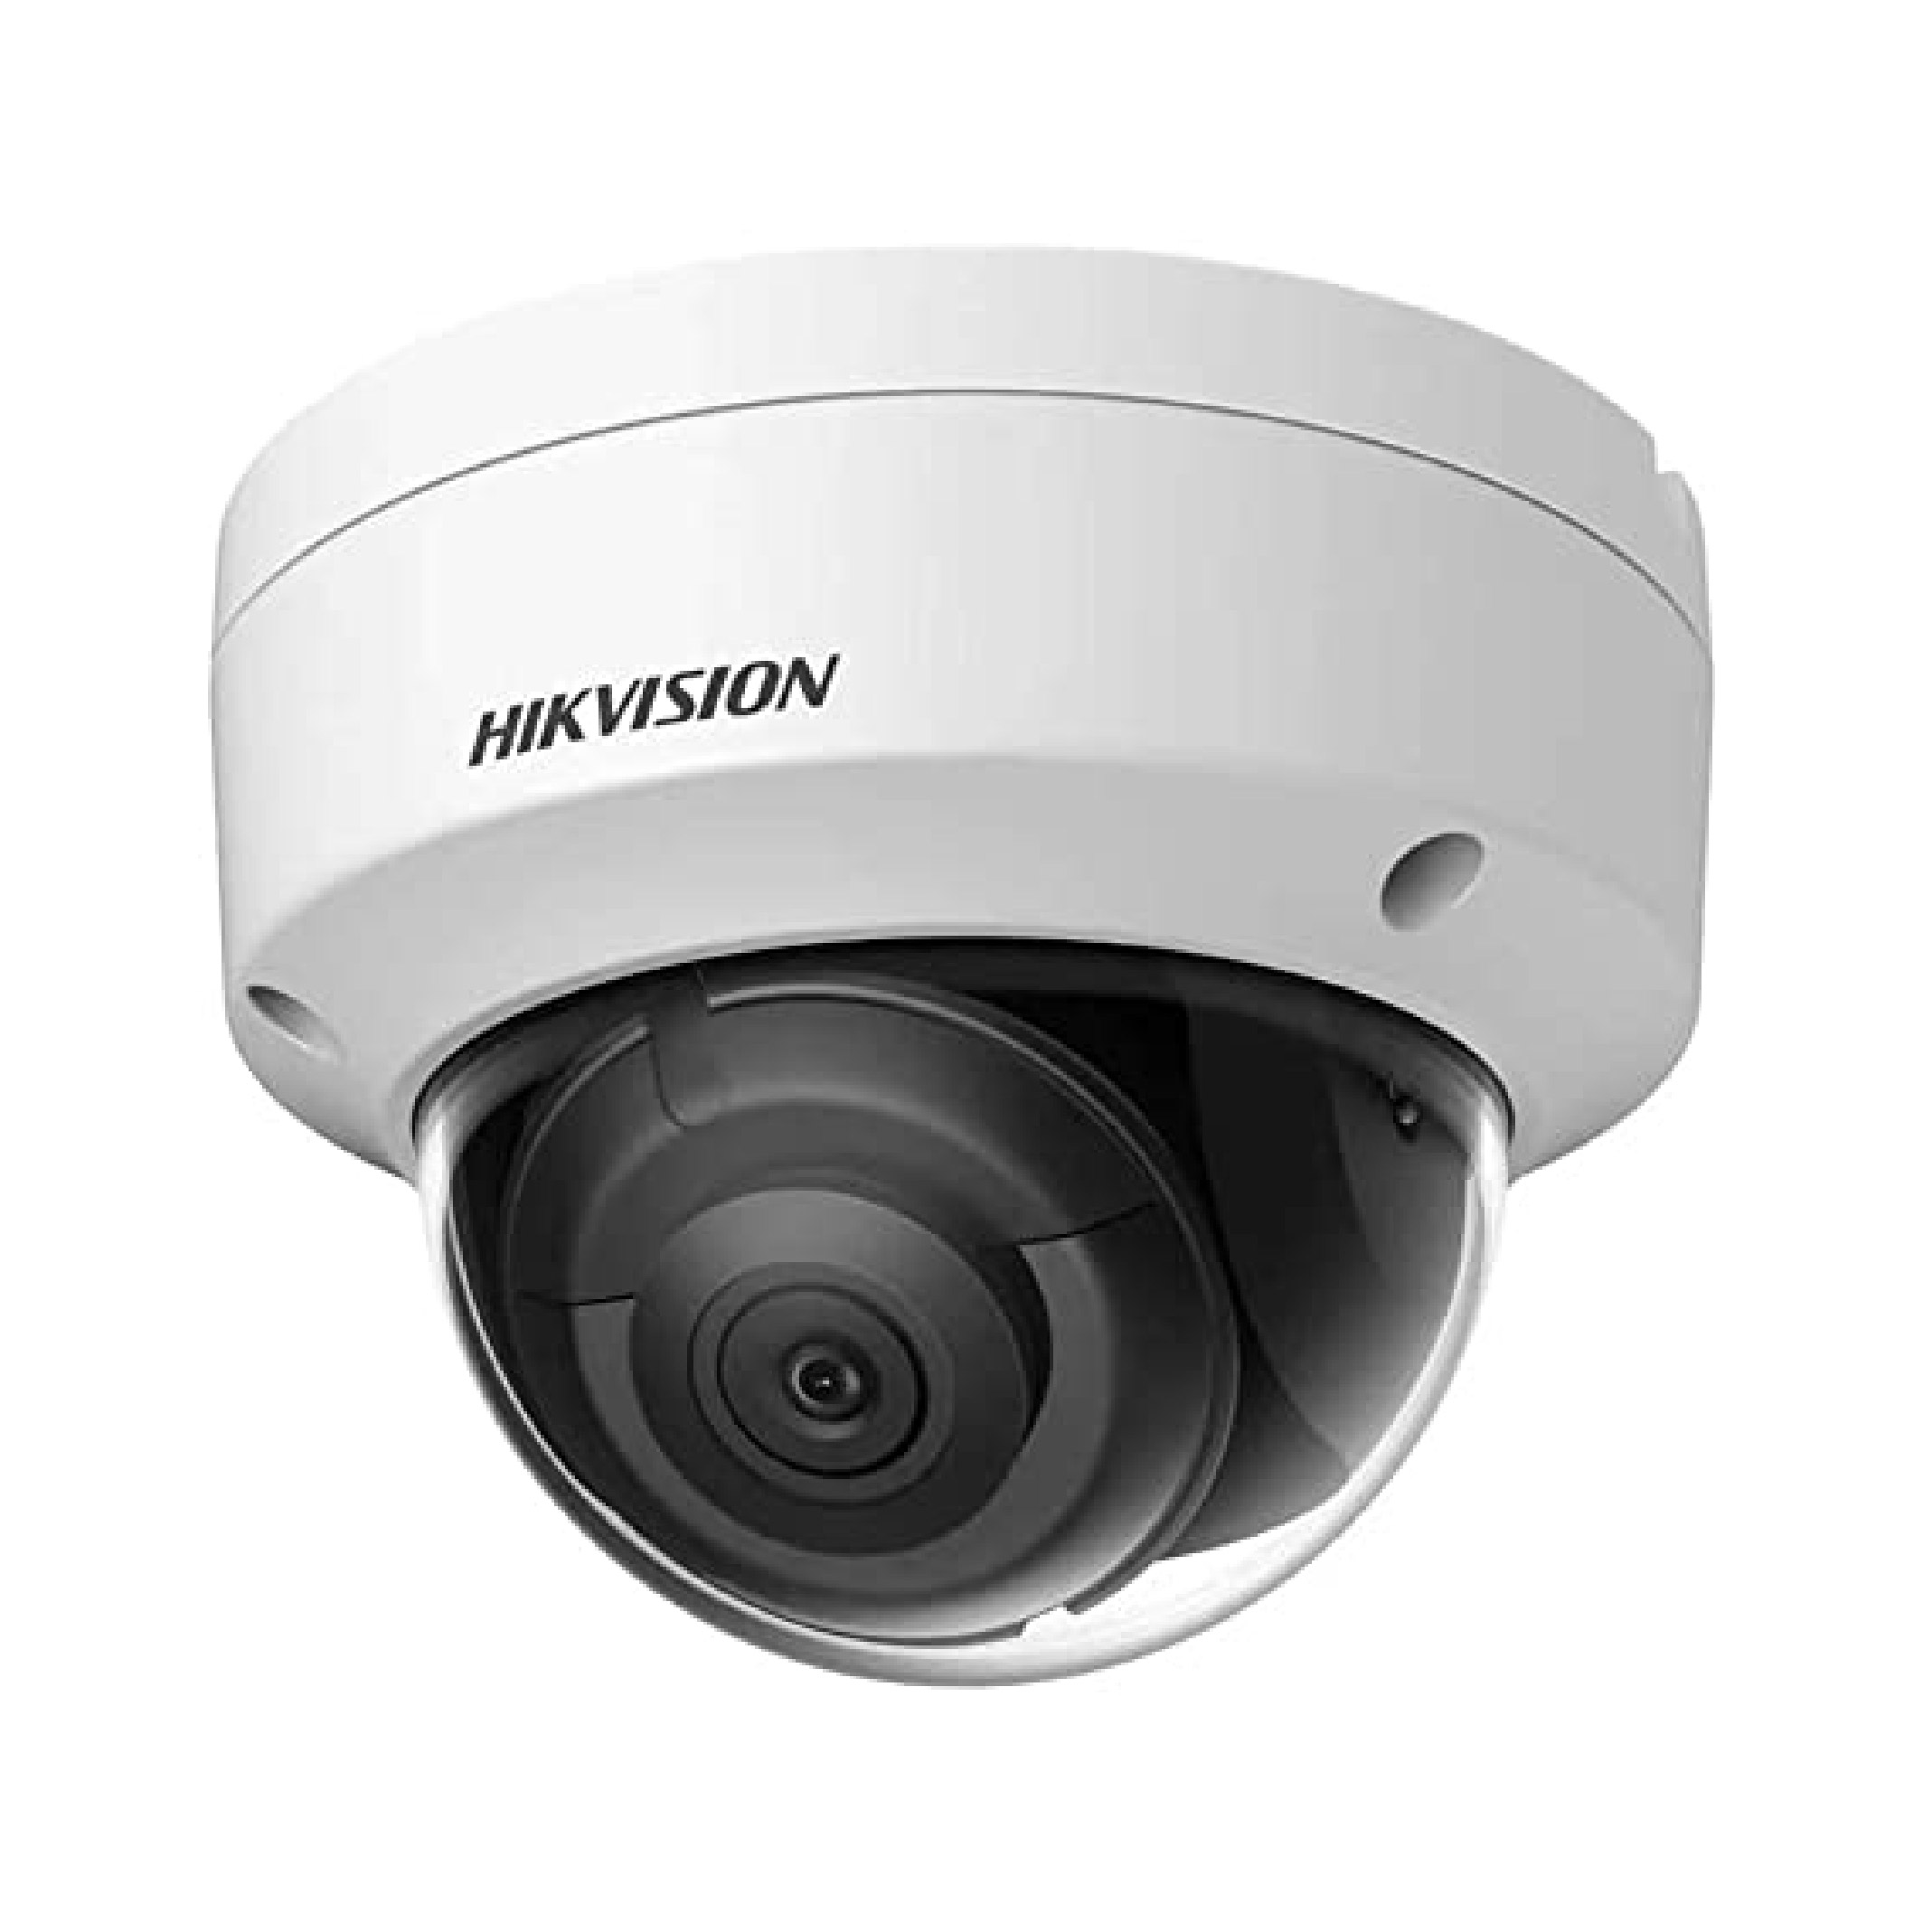 HIKVISION DS-2CD2185FWD-I(S) Turbo HD Camera